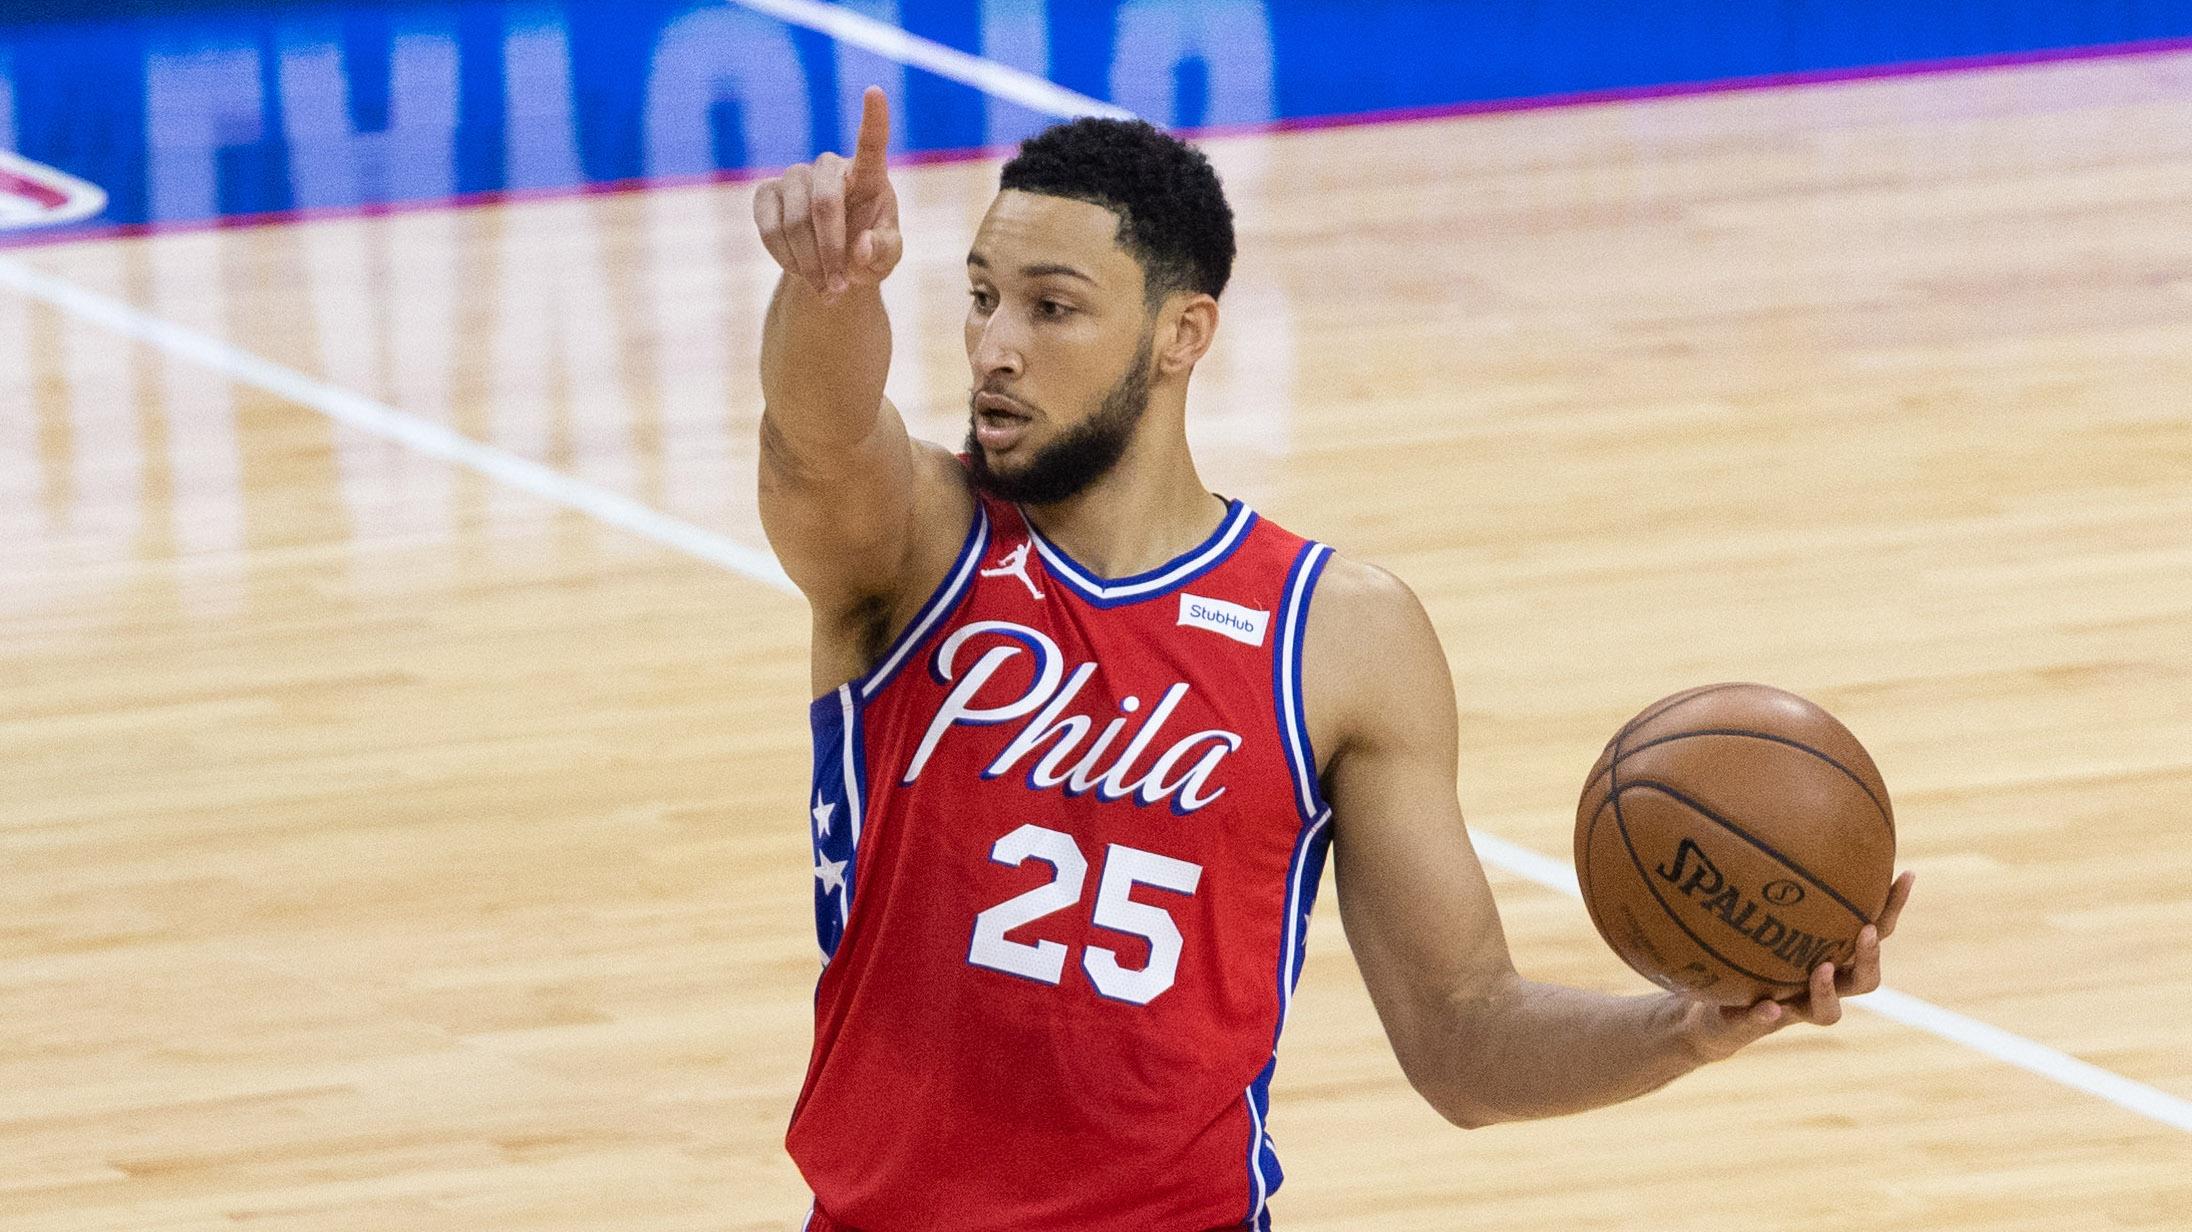 Jun 6, 2021; Philadelphia, Pennsylvania, USA; Philadelphia 76ers guard Ben Simmons (25) brings the ball up court against the Atlanta Hawks during the first quarter of game one in the second round of the 2021 NBA Playoffs at Wells Fargo Center. / Bill Streicher-USA TODAY Sports